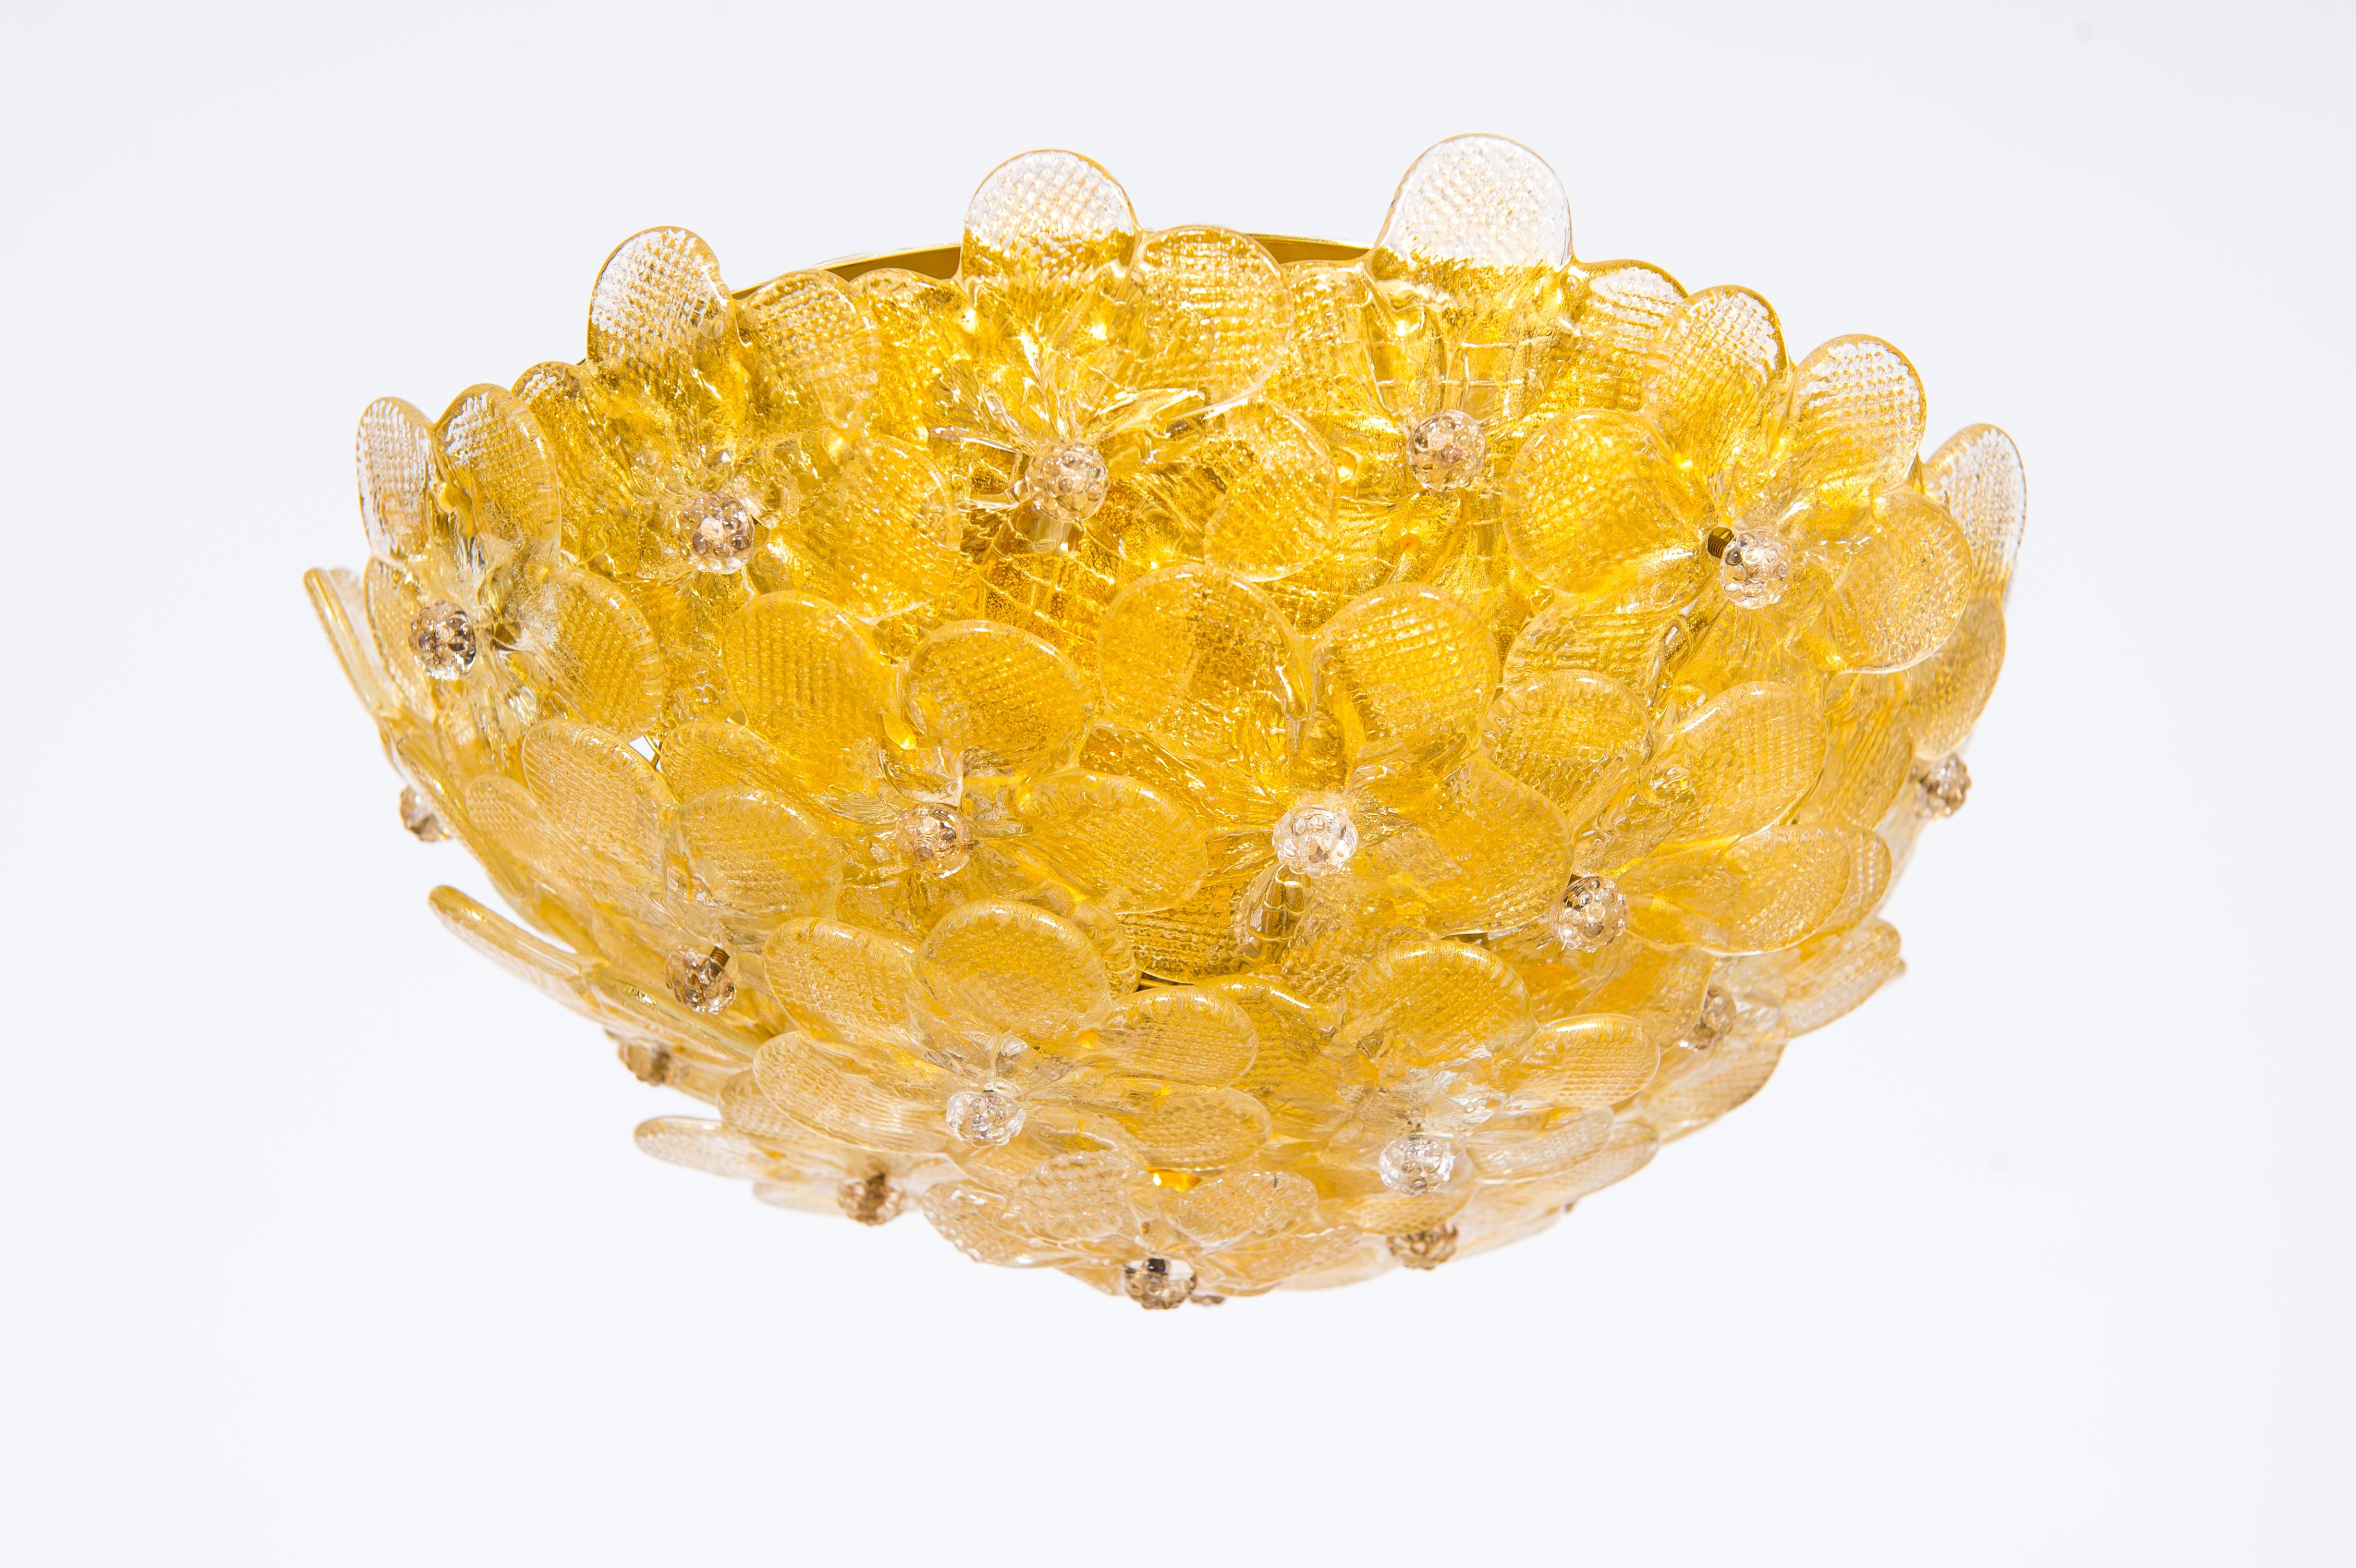 Contemporary Italian Venetian Murano glass flush mount 21st Century with Gold Finishes.
This amazing work of art stands out for the quality and perfection of its details. It is made of a set of glass flowers that surround the flush mount, with a